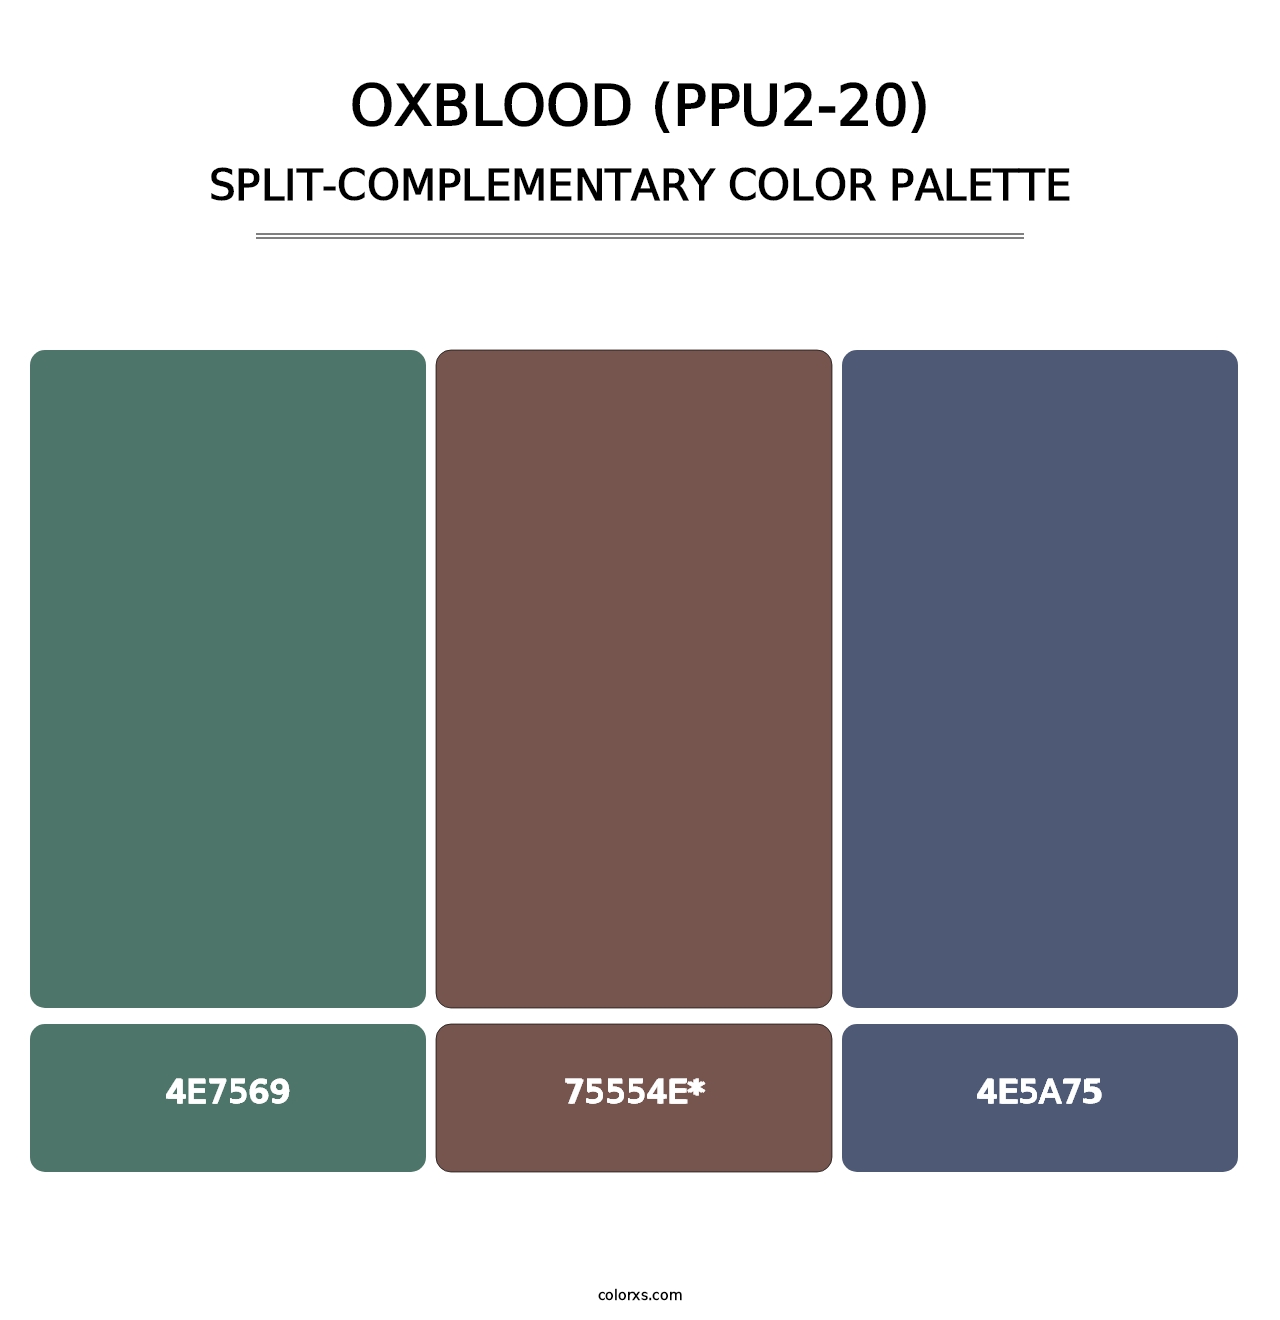 Oxblood (PPU2-20) - Split-Complementary Color Palette